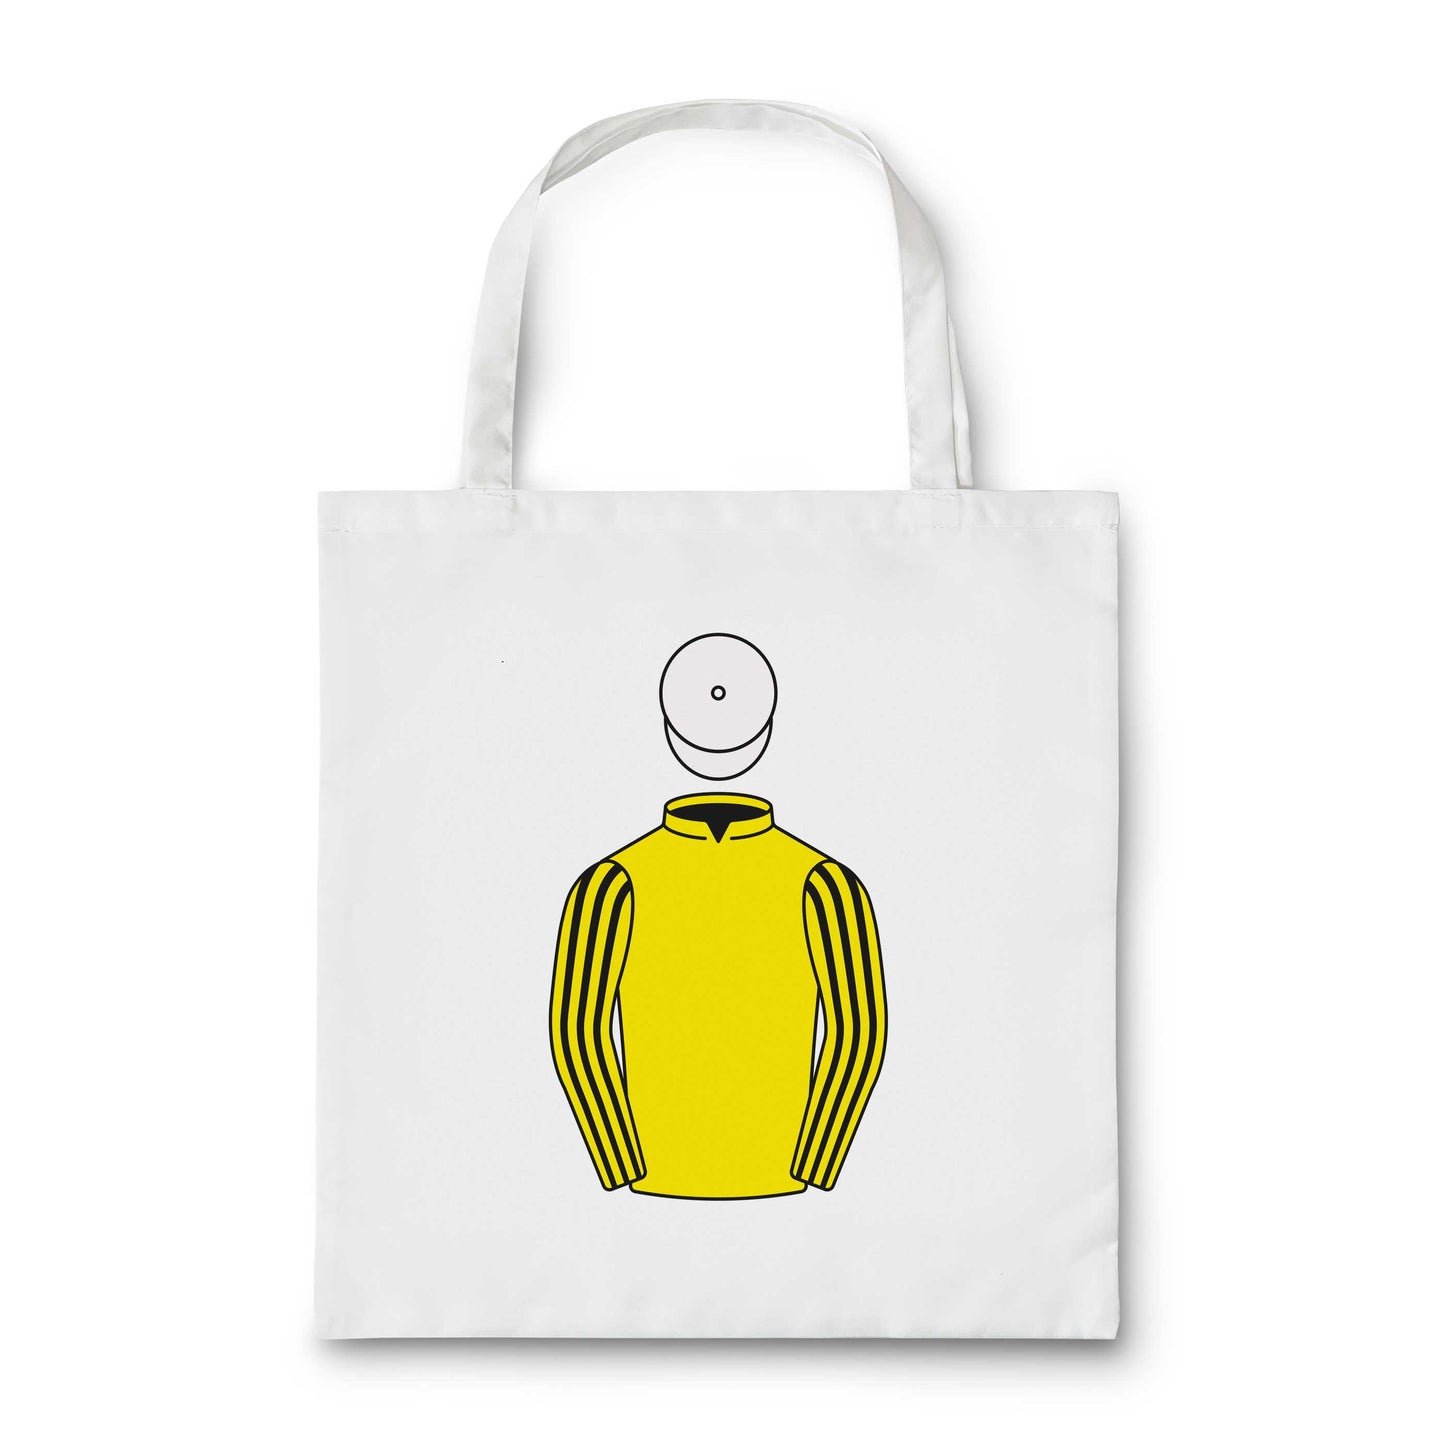 W J and T C O Gredley Tote Bag - Tote Bag - Hacked Up